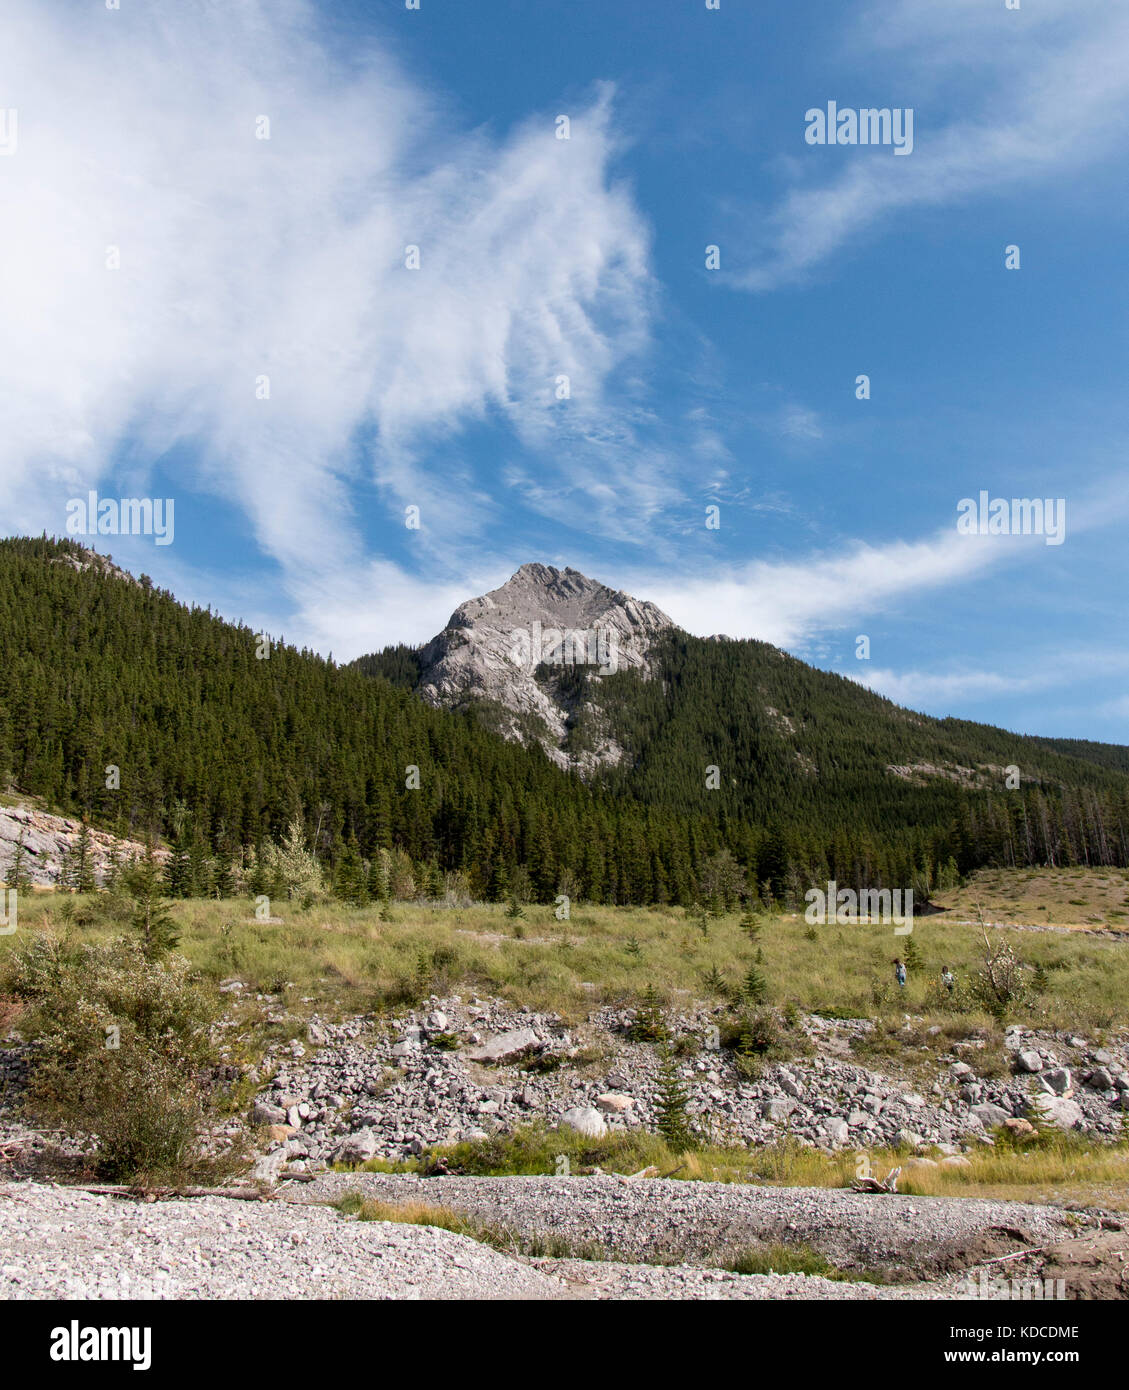 Clouds swirling over the peaks of mountains in Kananaskis country. Stock Photo